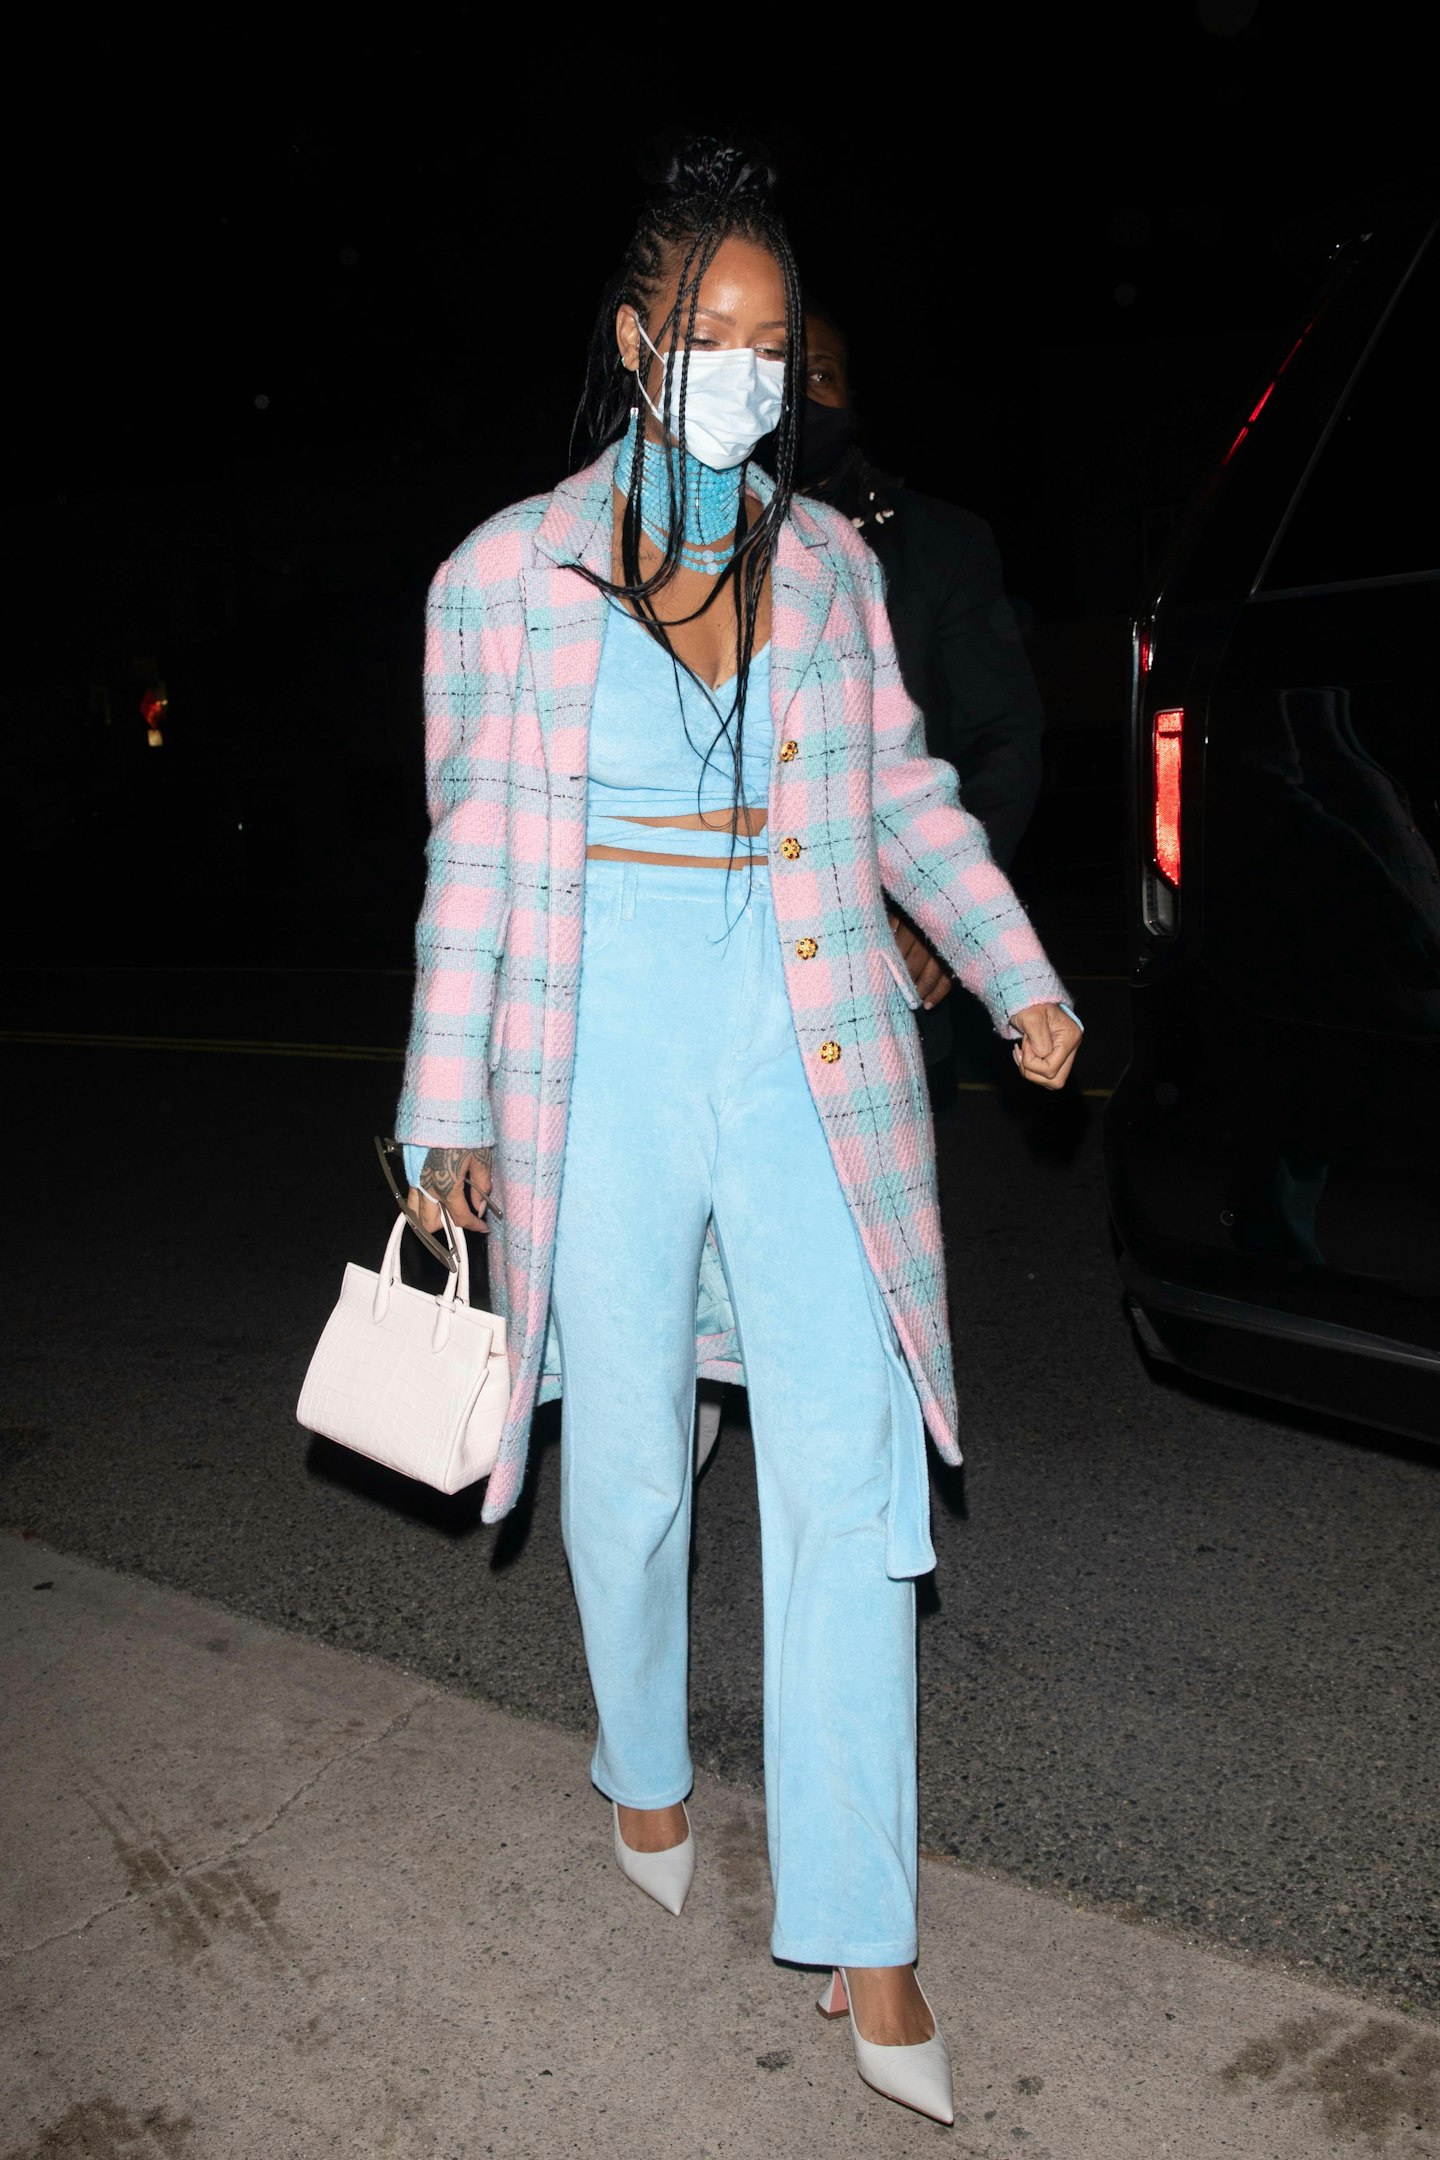 Rihanna wearing a blue and pink outfit